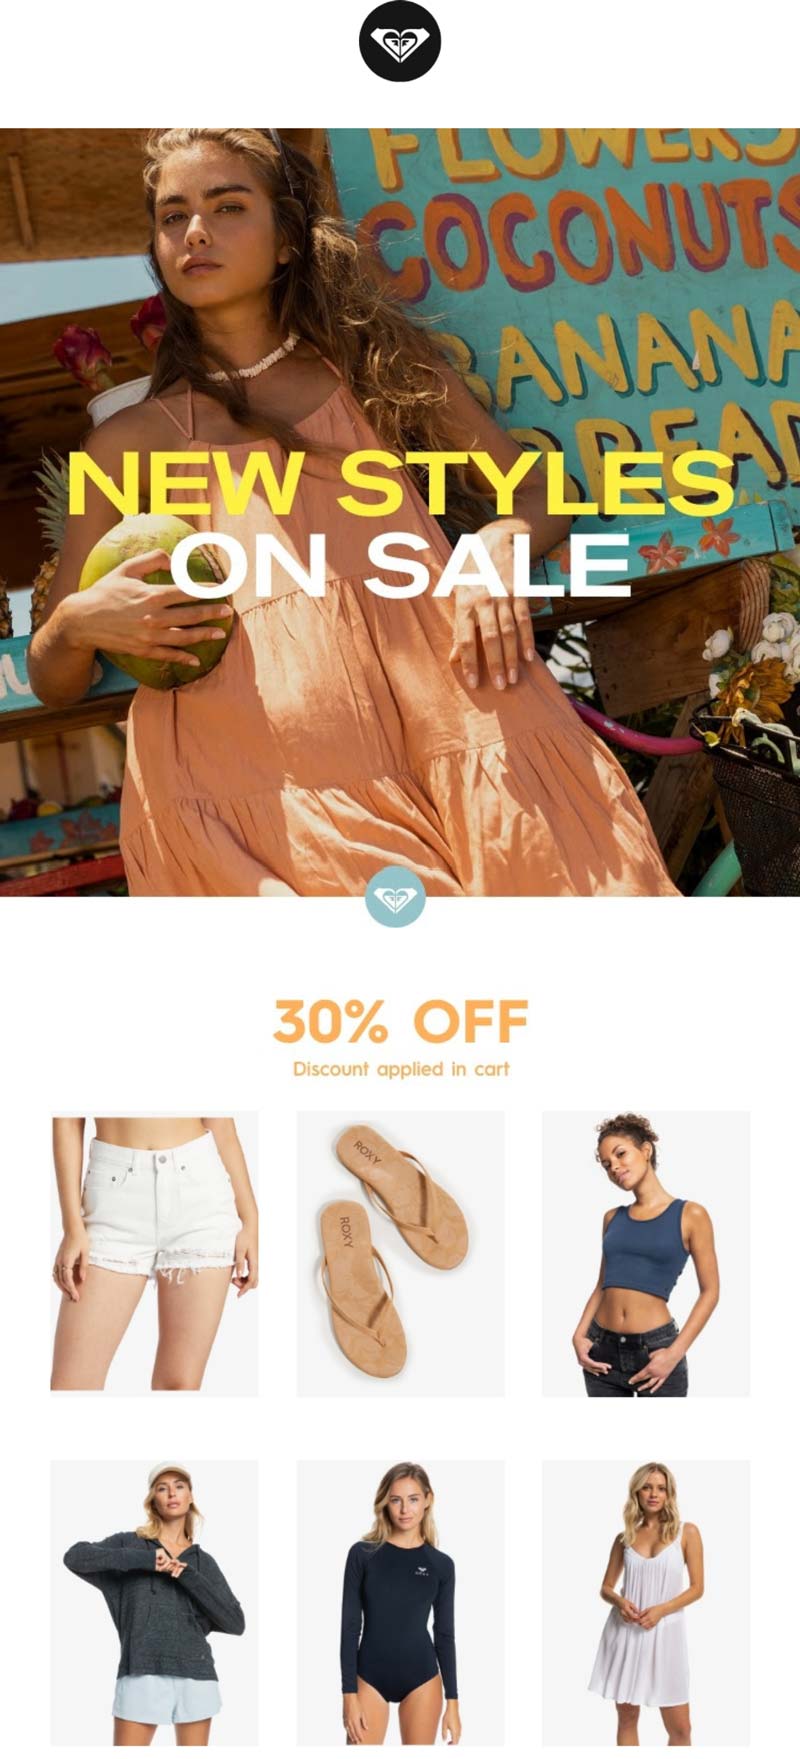 Roxy stores Coupon  30% off new styles at Roxy #roxy 